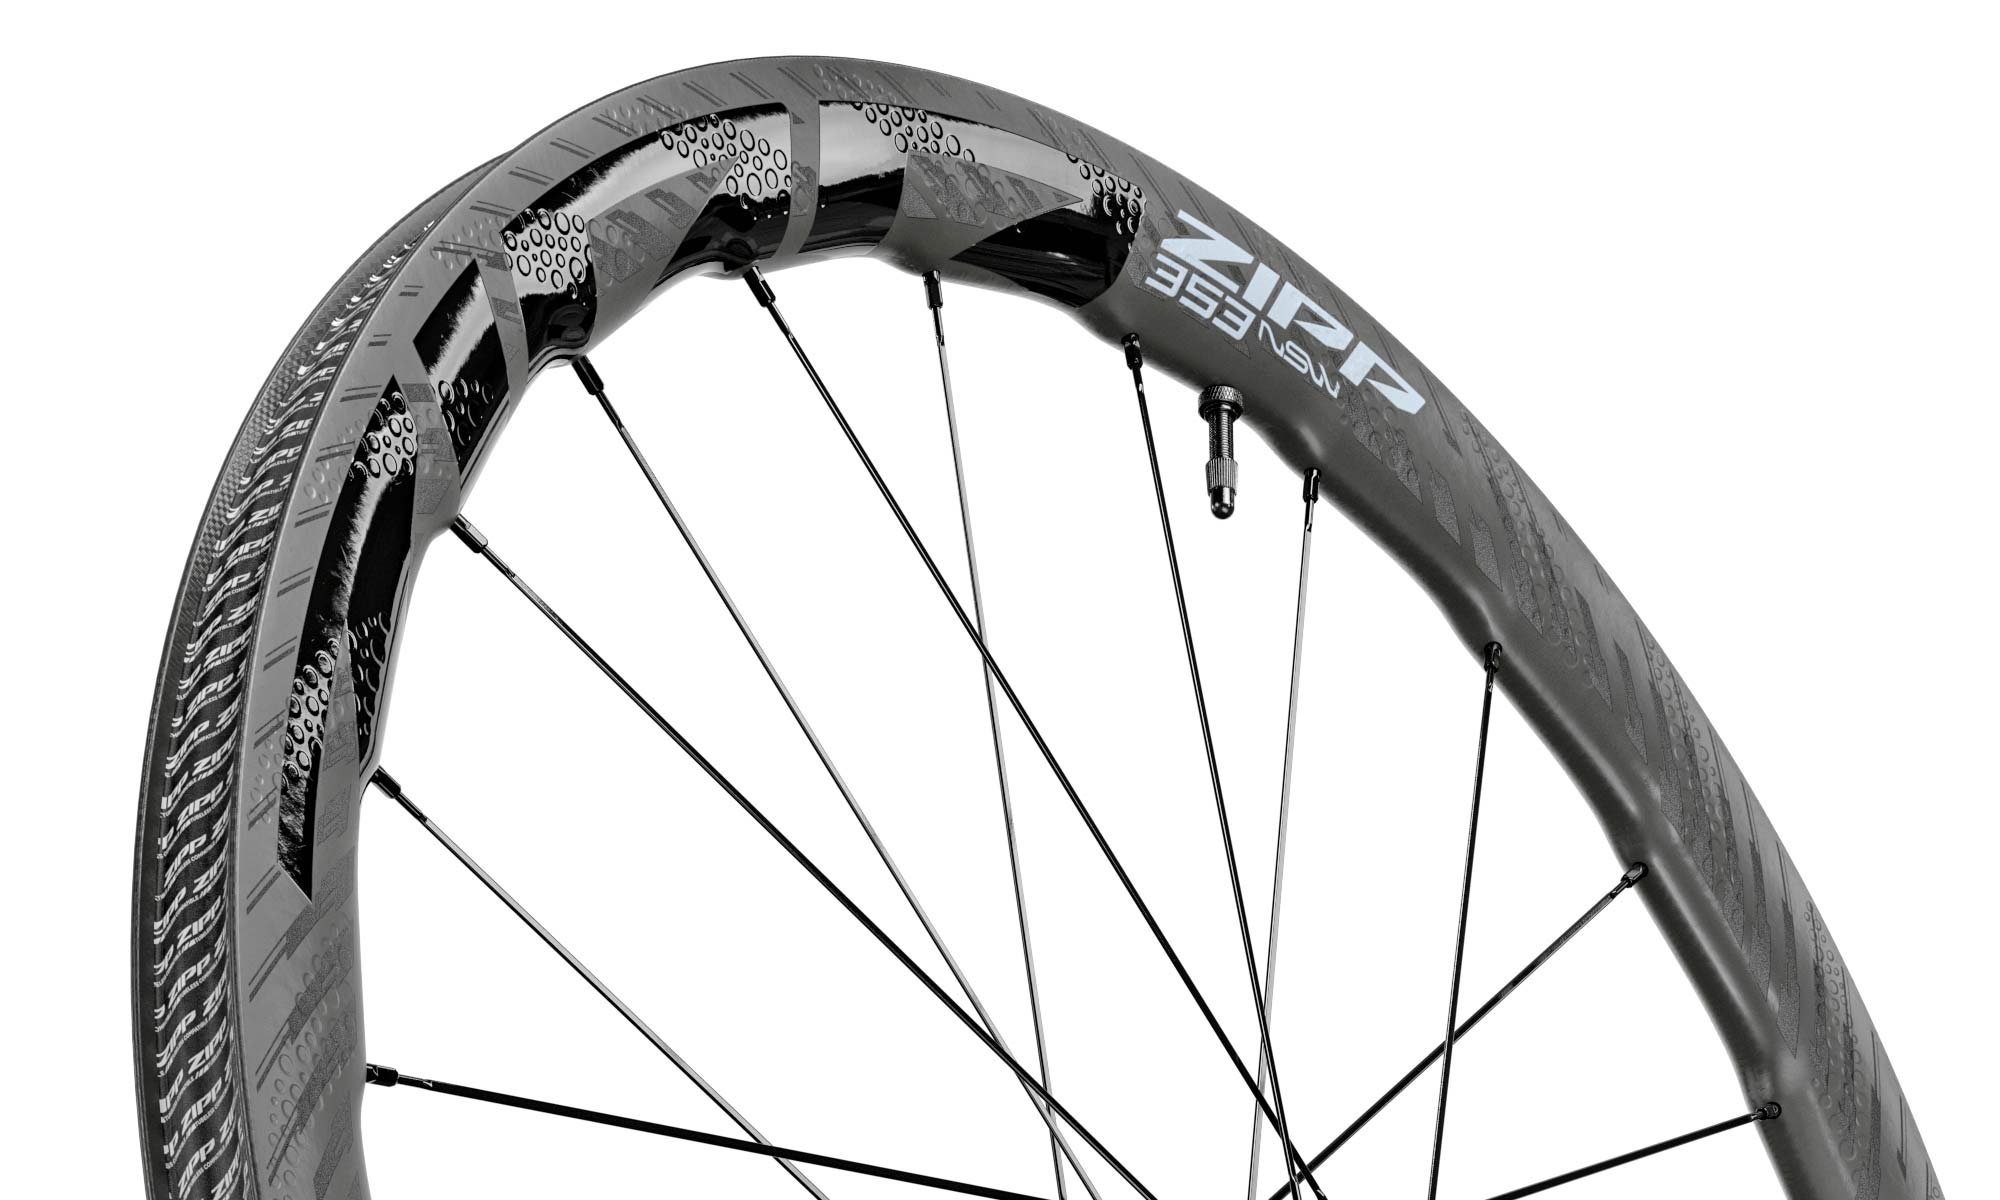 UCI to Perform ‘Urgent’ Study of Hookless Rims & Tubeless Tires to Address Safety Concerns